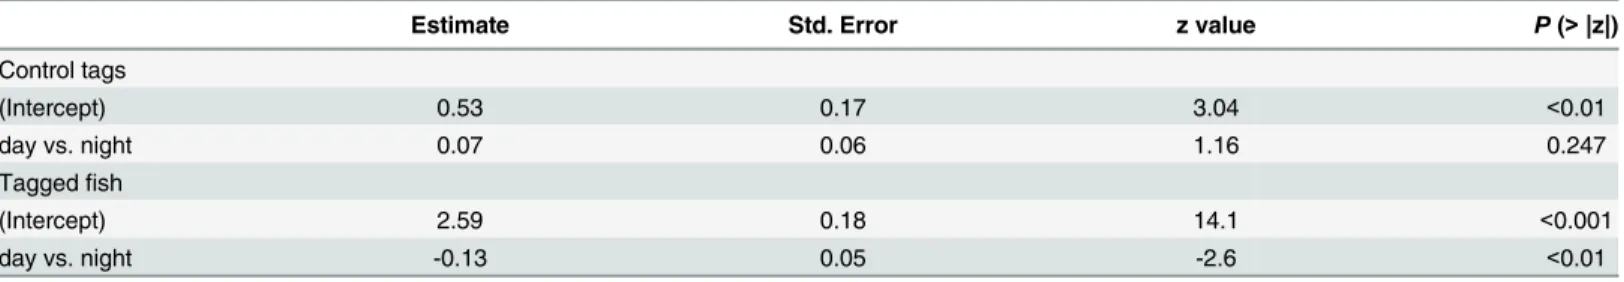 Table 2. Results of generalized linear mixed model testing effect of diel phase (day vs